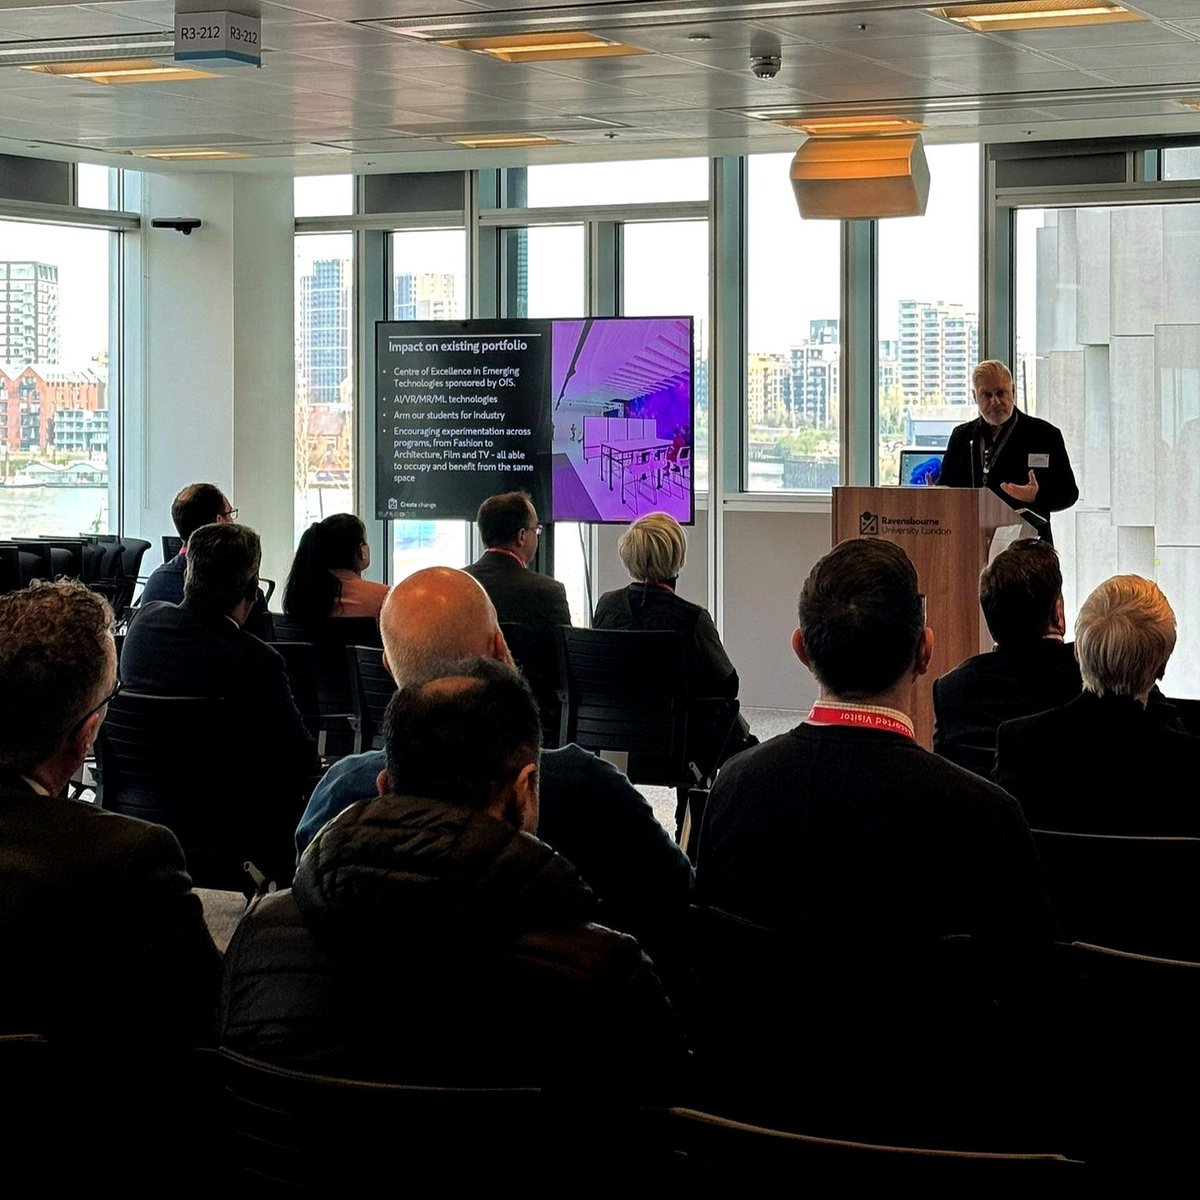 March has been exciting! 🚀 🔵 We hosted a packed open day 🔵 StartUp Lab student Tulasi spoke at the Design District London 🔵 Derek Y spoke at the Financial Services Forum at JM Finn 🔵 We hosted a Local London LSIF event 🔵 Our RaveLATE film special featured industry speakers